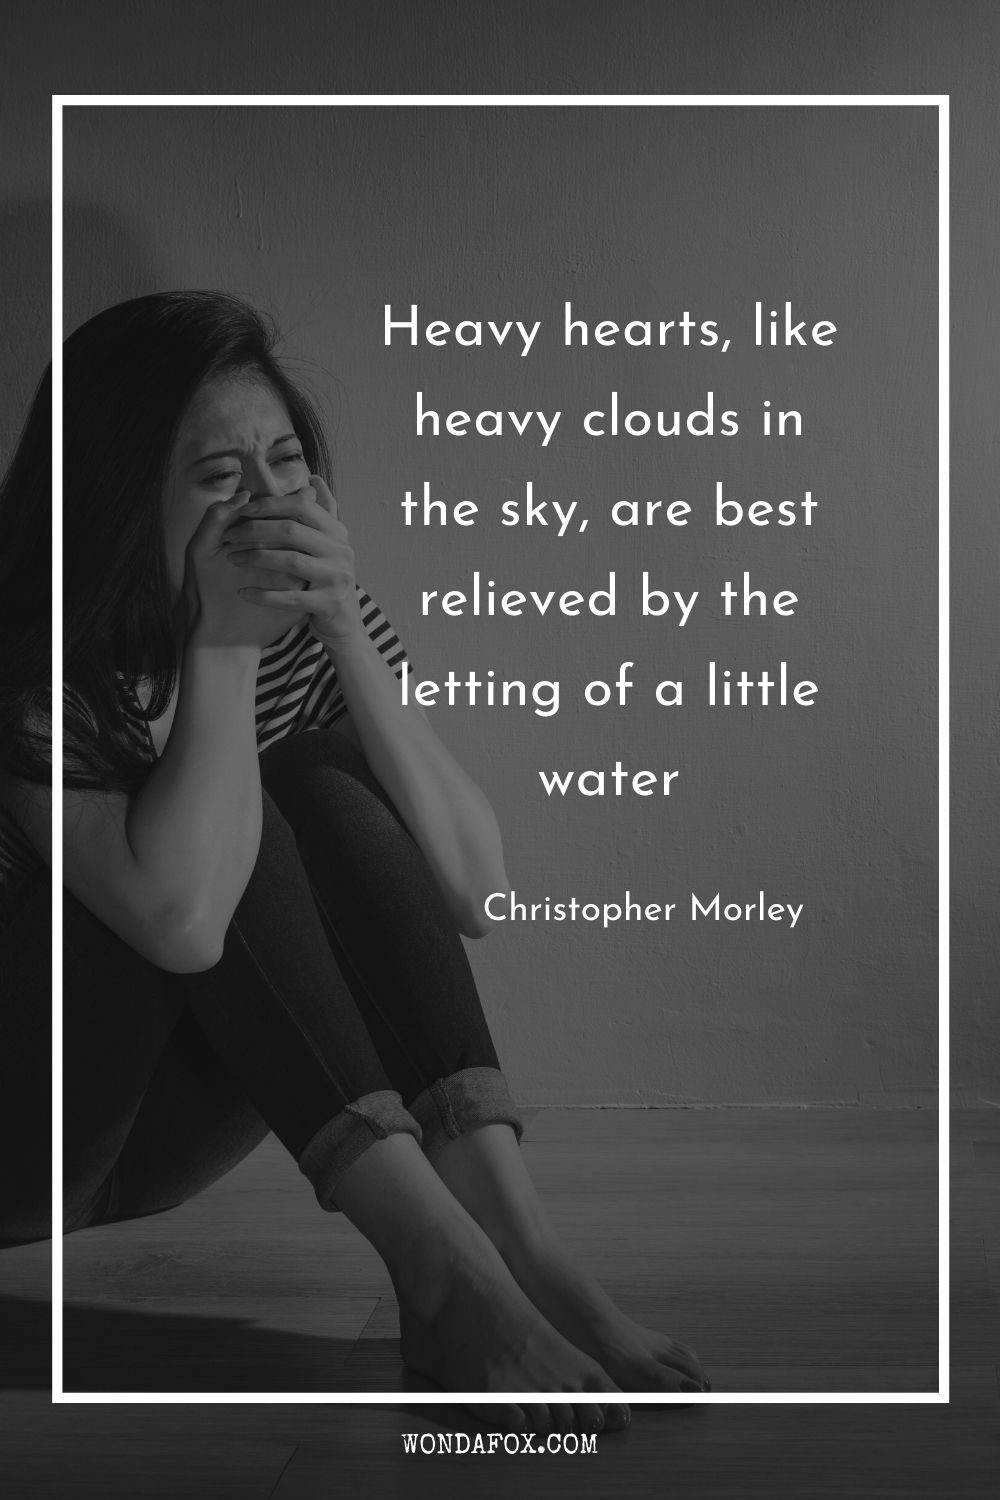 Heavy hearts, like heavy clouds in the sky, are best relieved by the letting of a little water